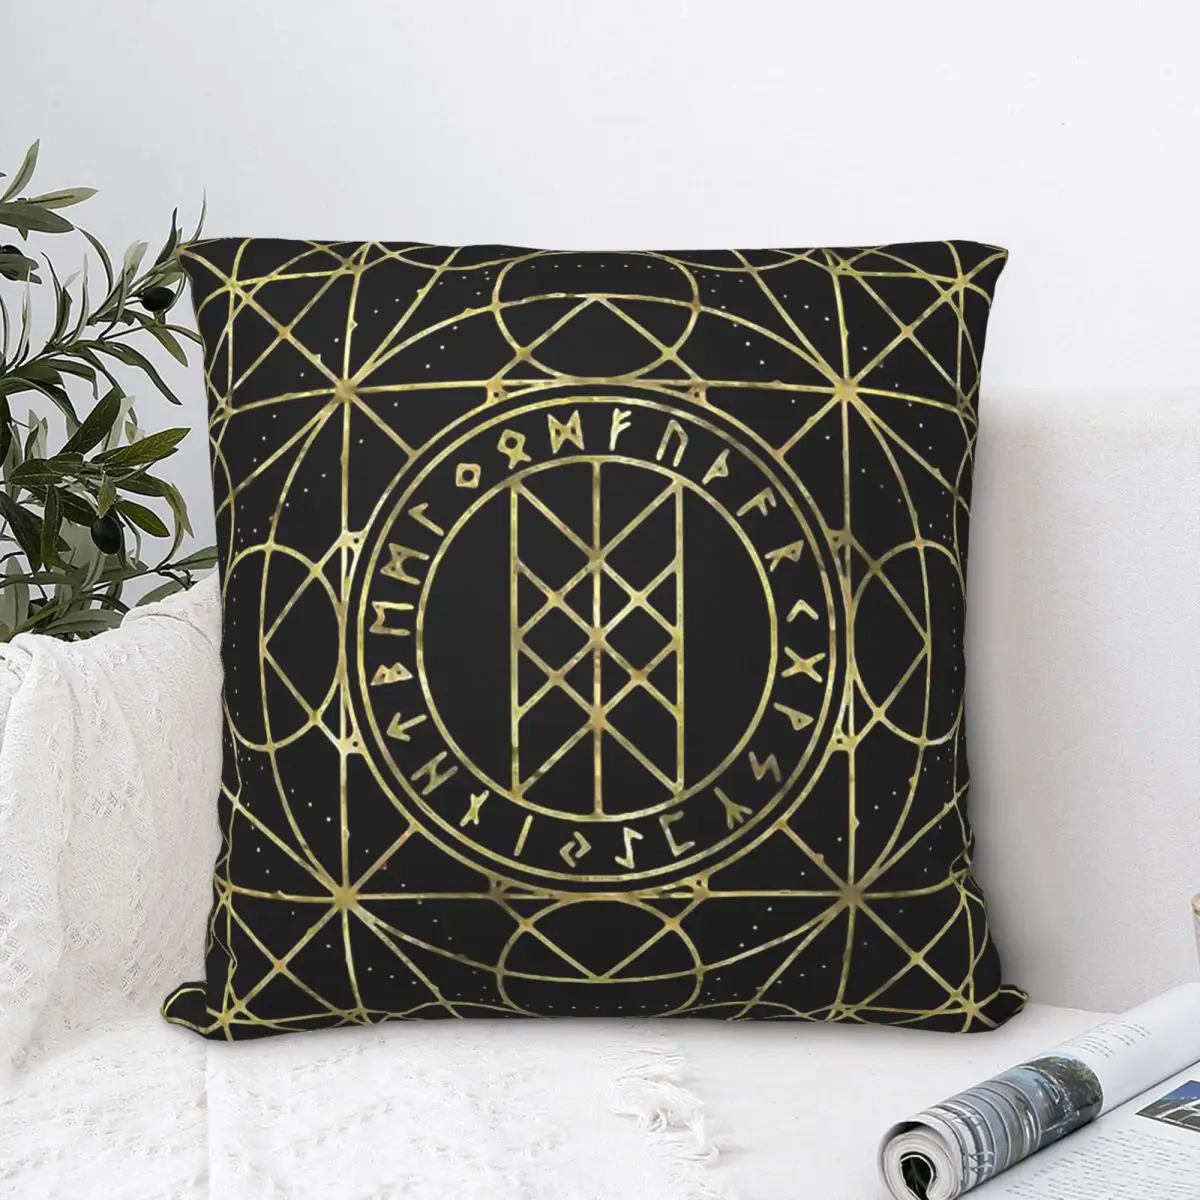 

Web Of Wyrd The Matrix Of Fate Pillowcase Viking Norse Mythology Backpack Cushion For Sofa Office Coussin Covers Decorative